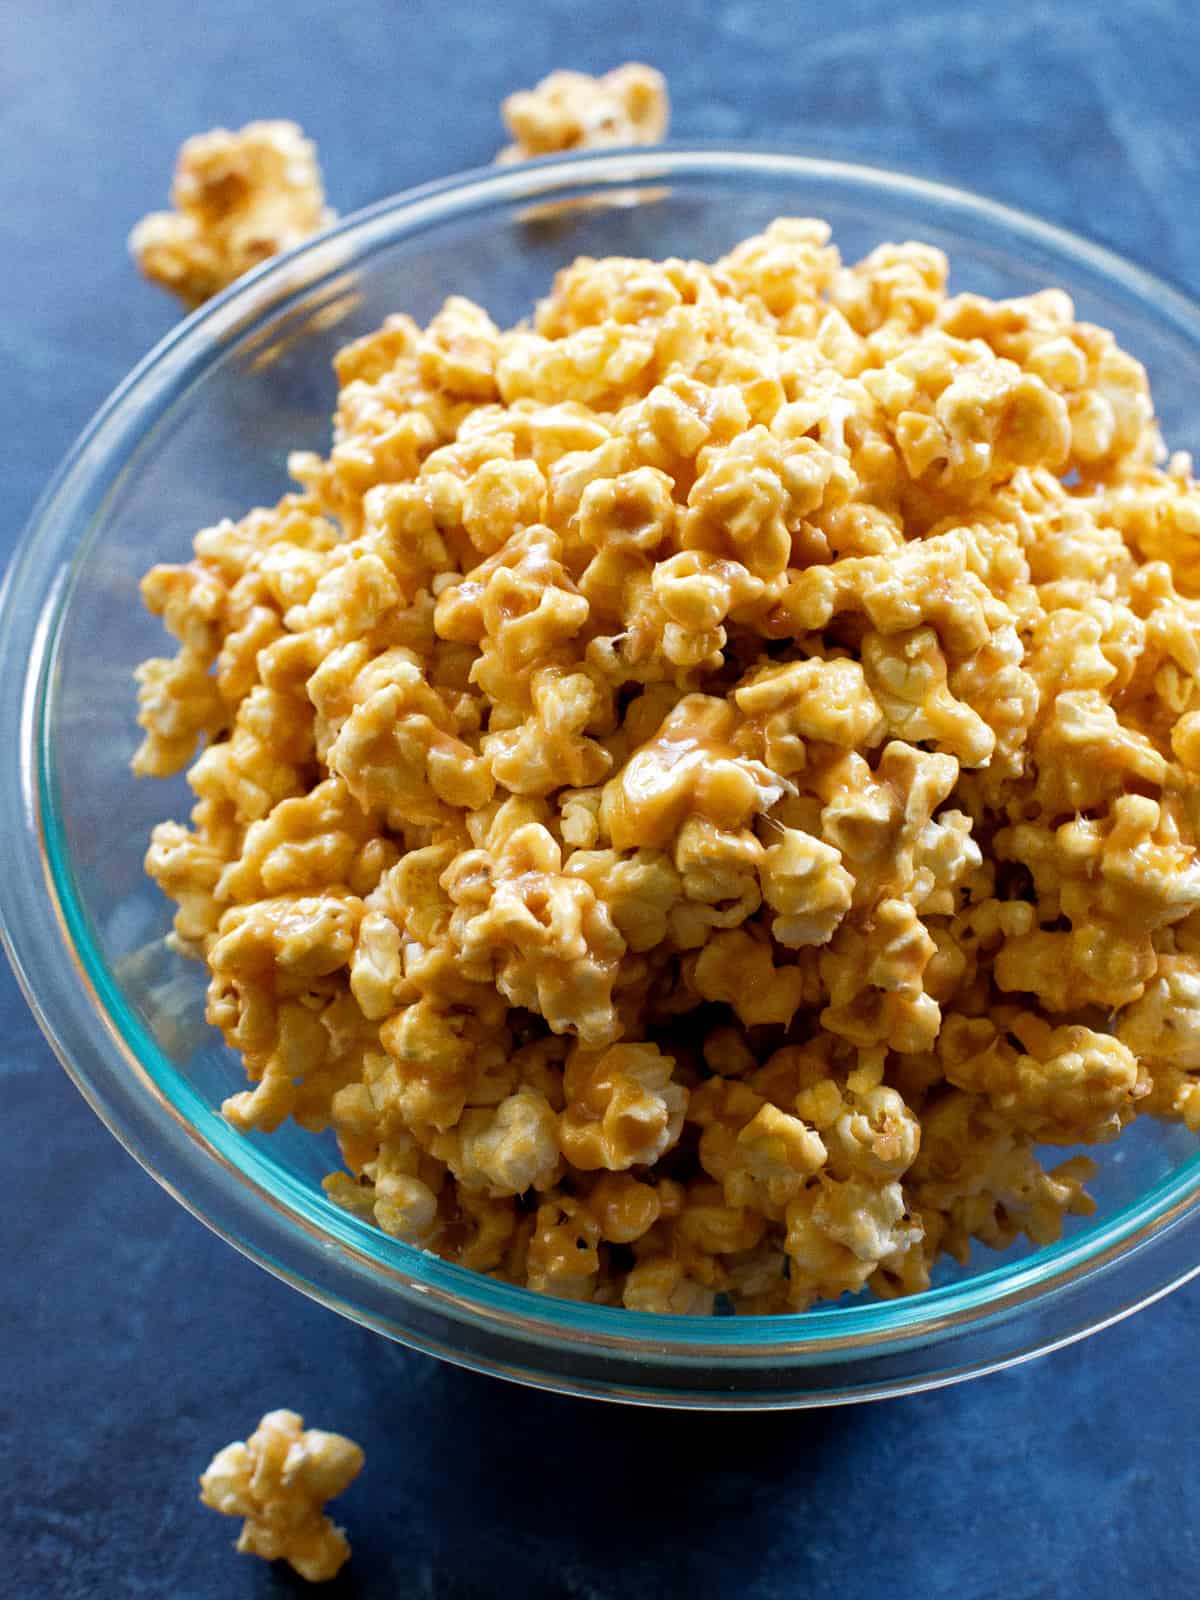 Soft Caramel Popcorn Recipe - The Girl Who Ate Everything